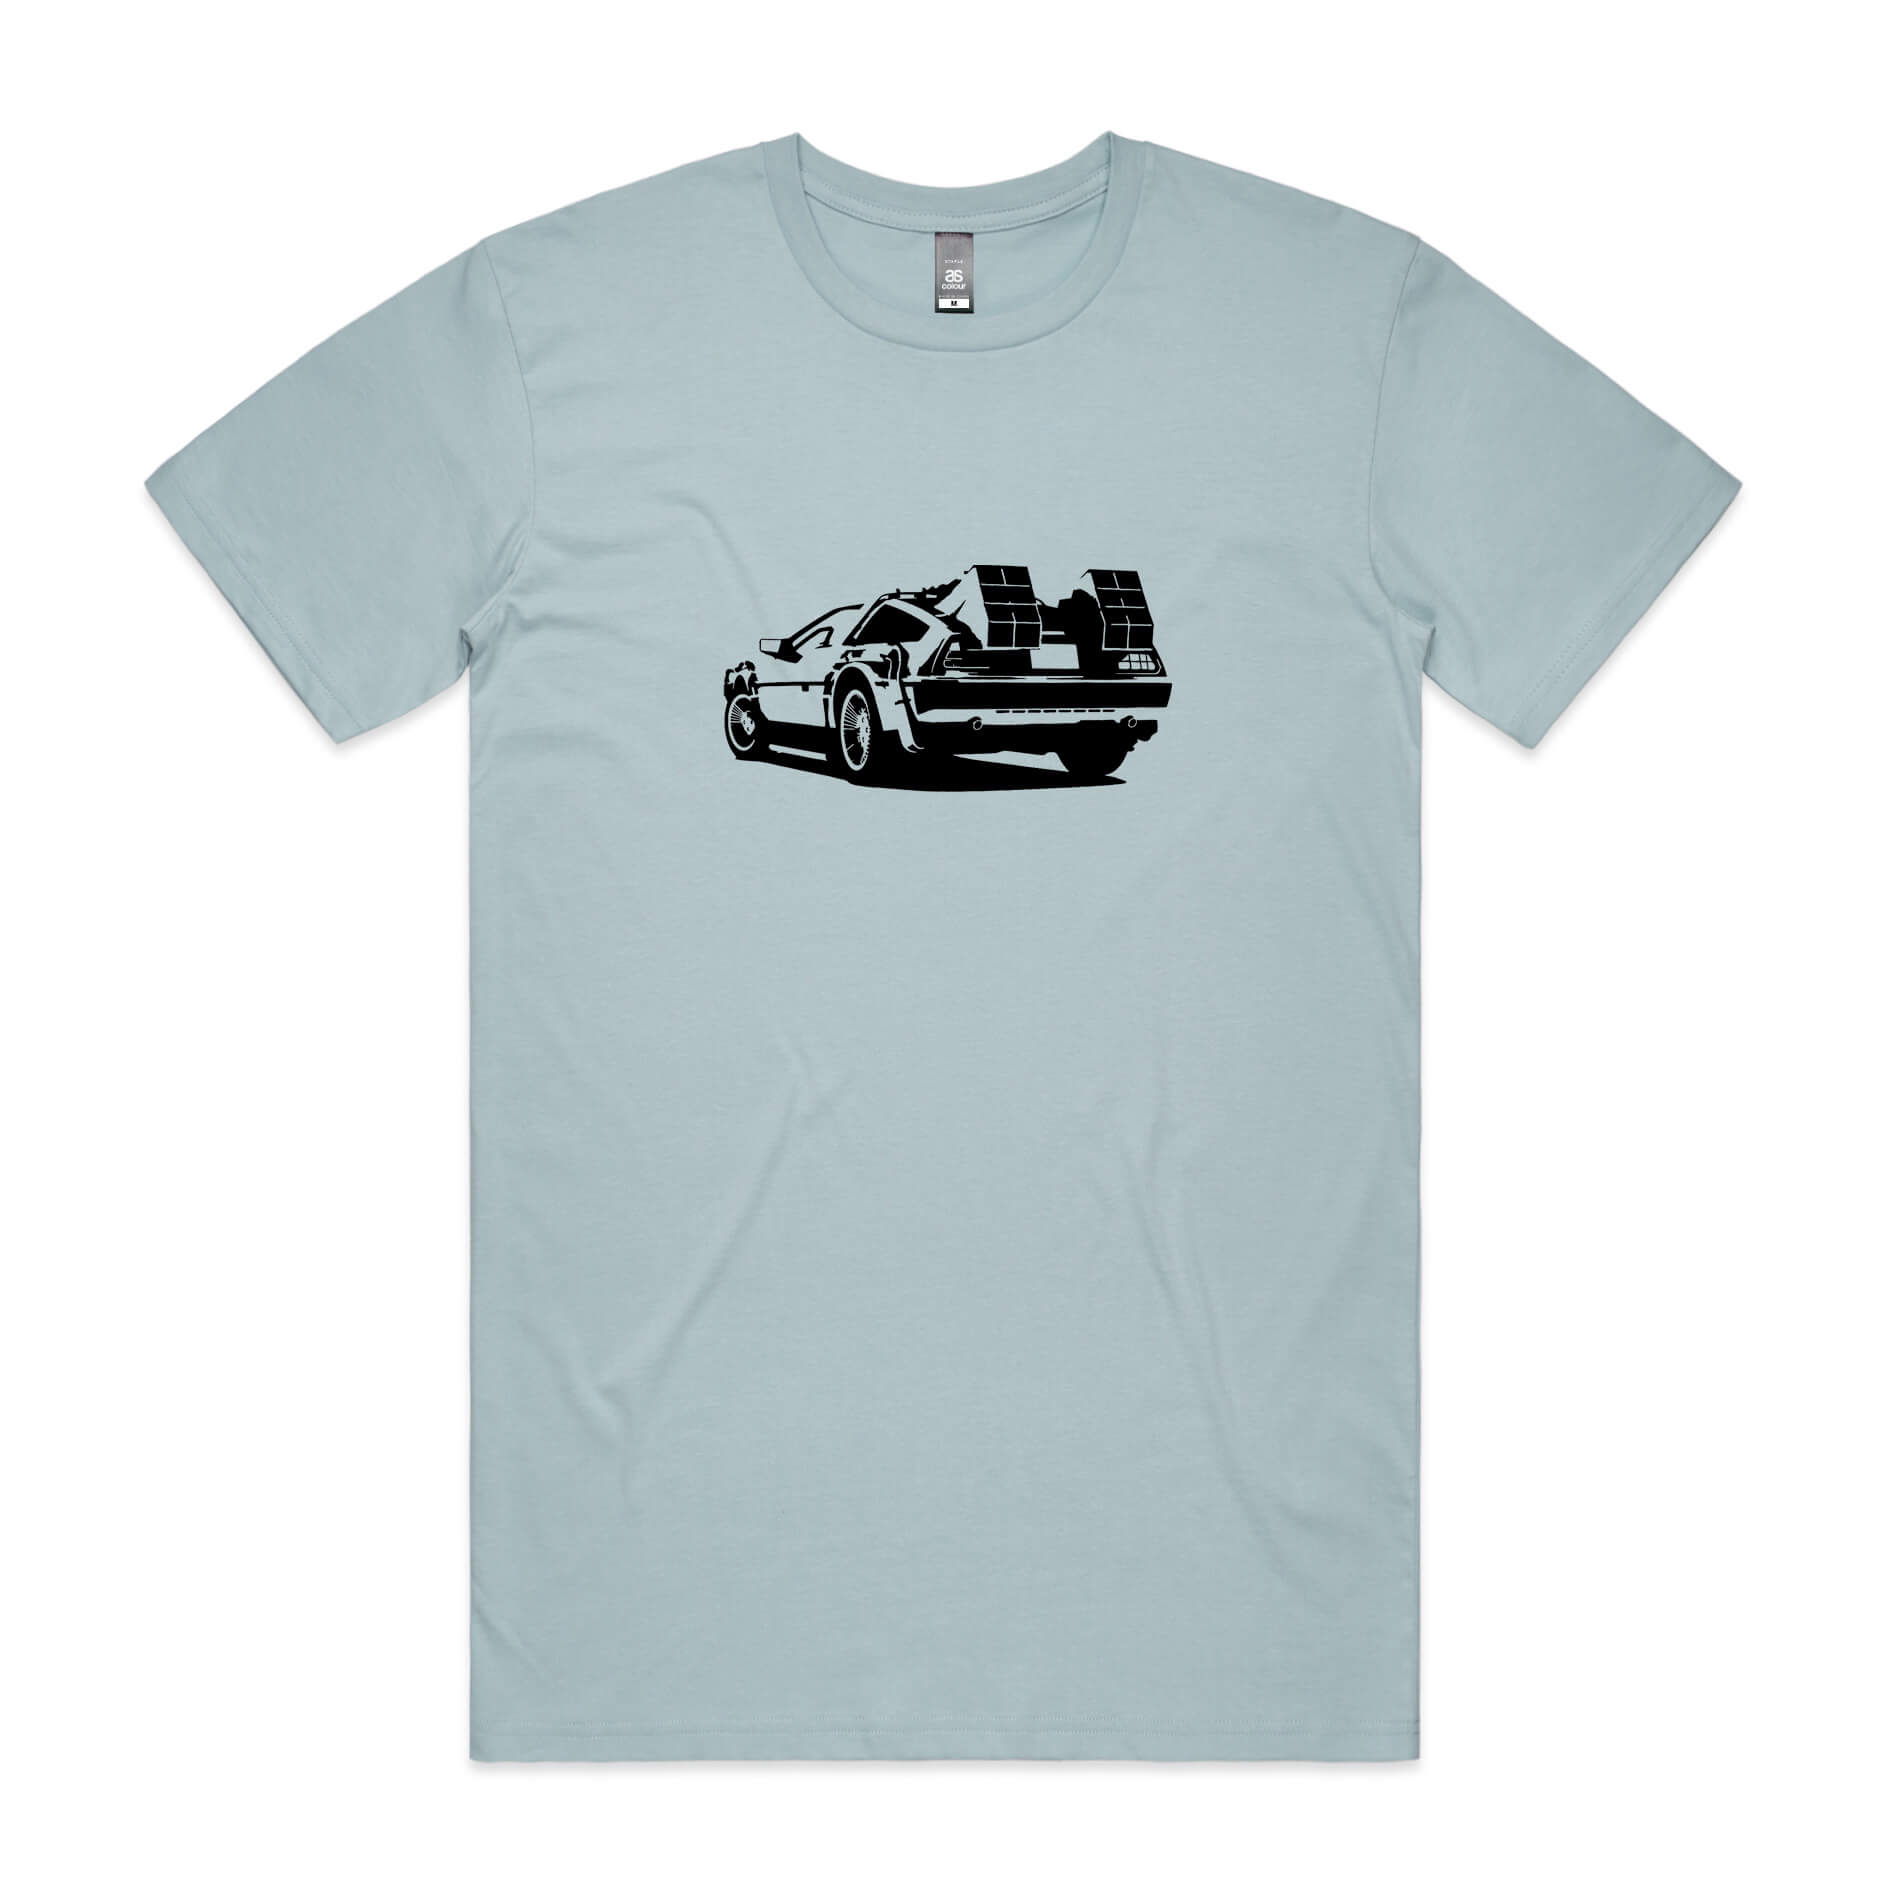 DeLorean Outatime t-shirt in light blue with black time machine car graphic